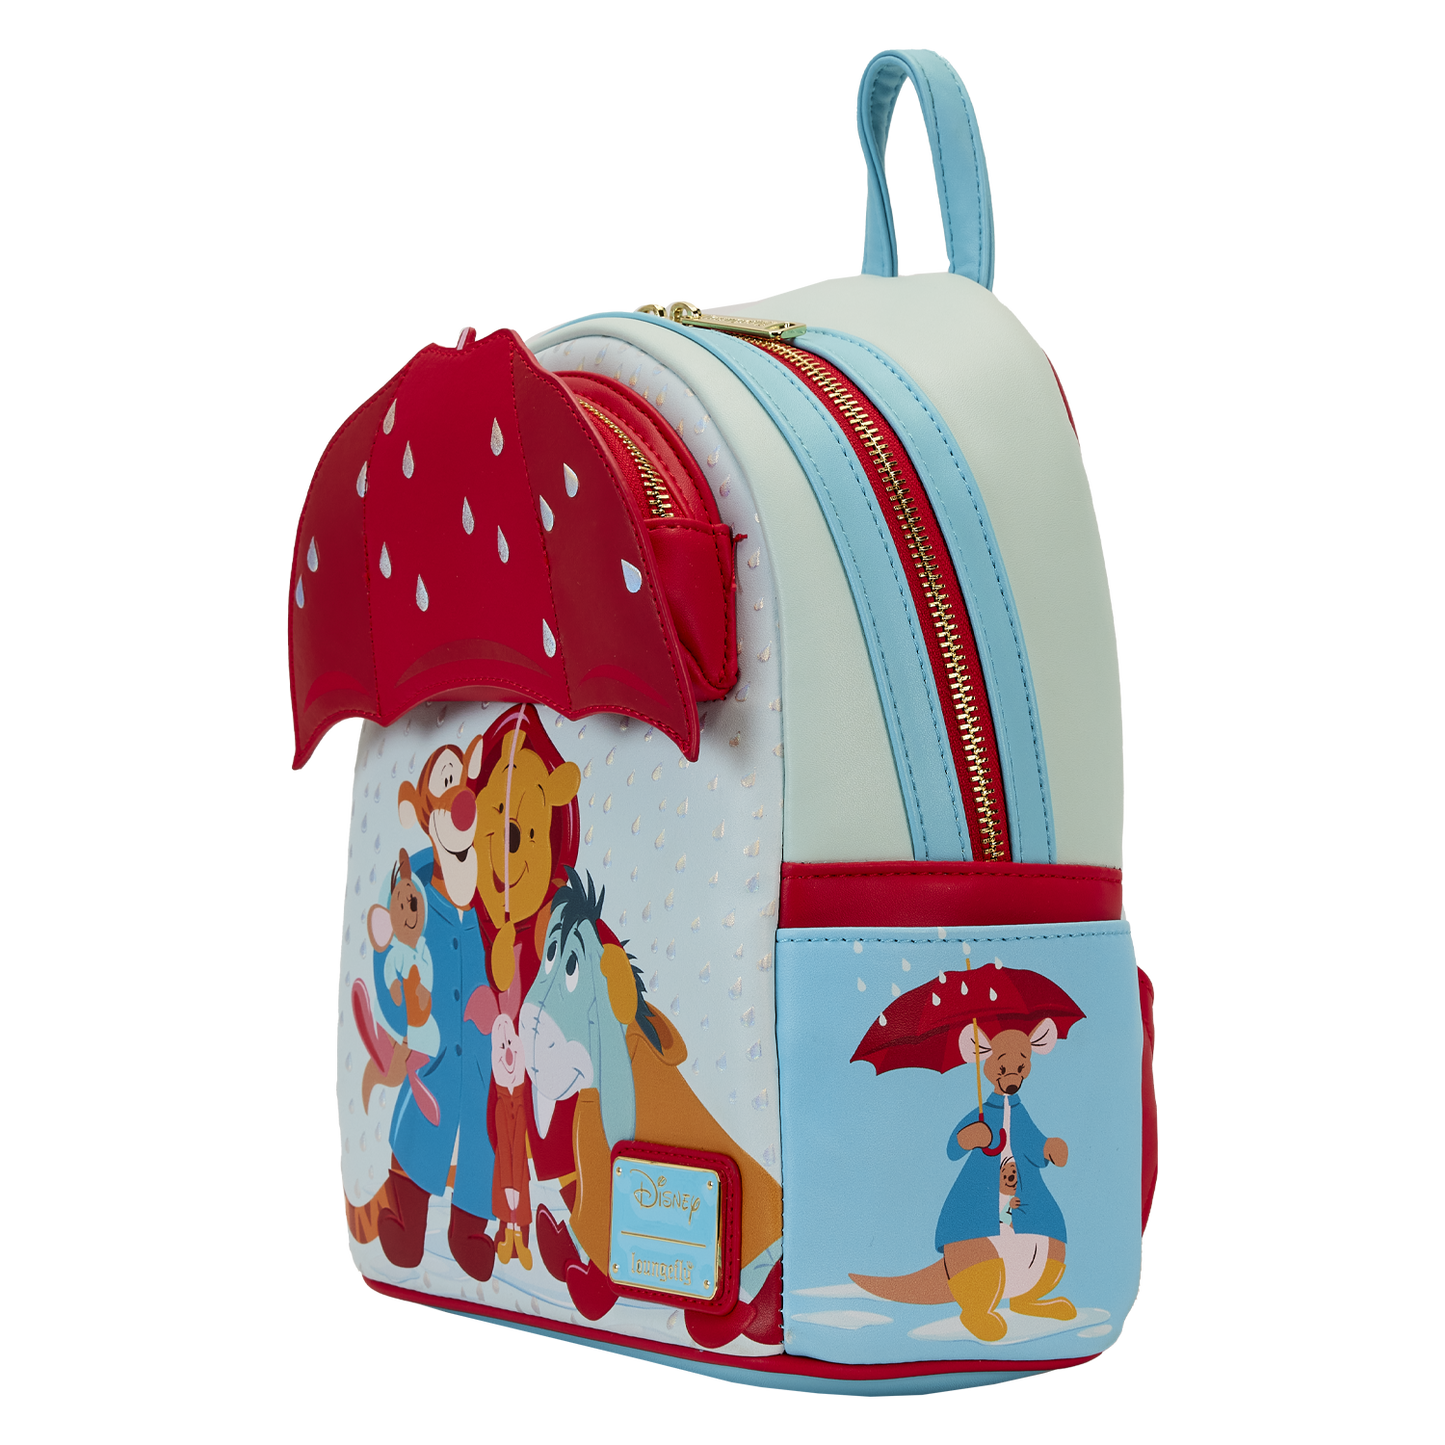 Winnie The Pooh and Friends Rainy Day Mini Backpack